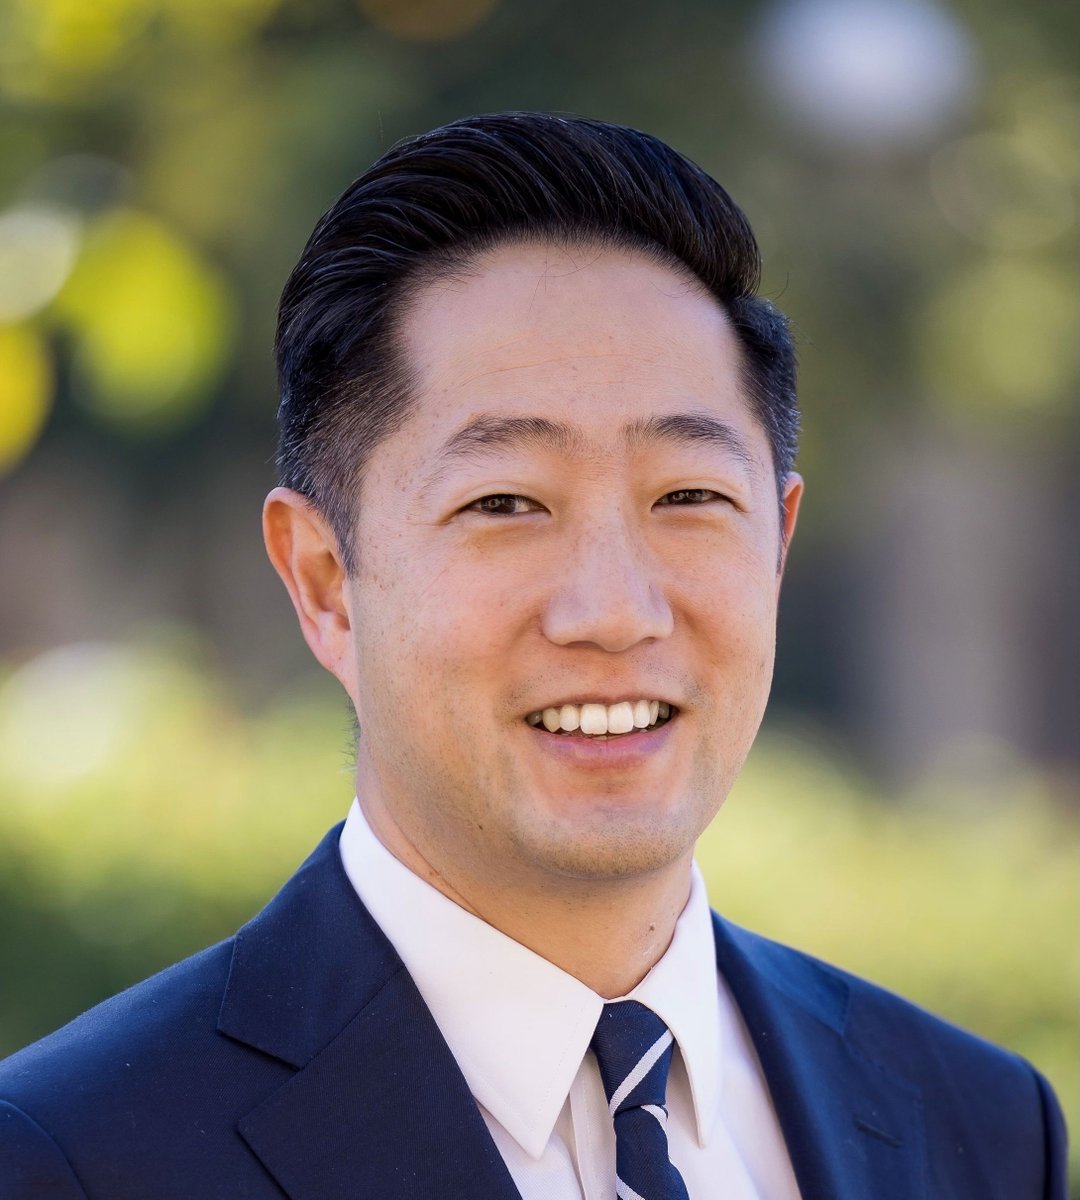 Our newly-named Physician in Chief, Dr. Ed Kao, spoke to the @smdailyjournal about the future of health care, the pandemic and telehealth. smdailyjournal.com/news/local/new…